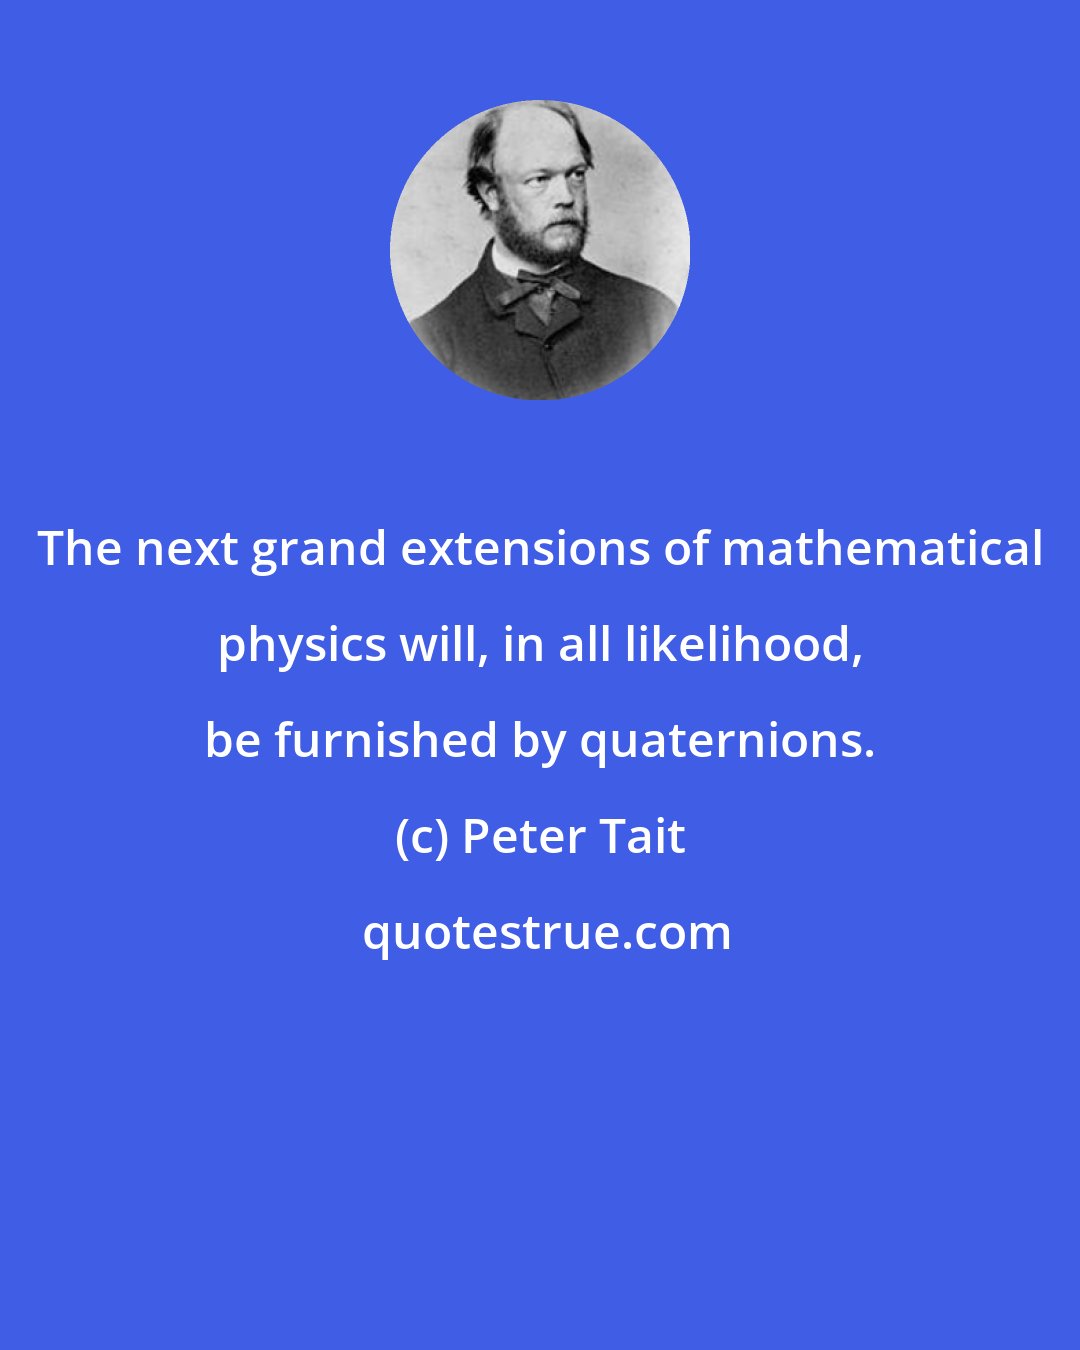 Peter Tait: The next grand extensions of mathematical physics will, in all likelihood, be furnished by quaternions.